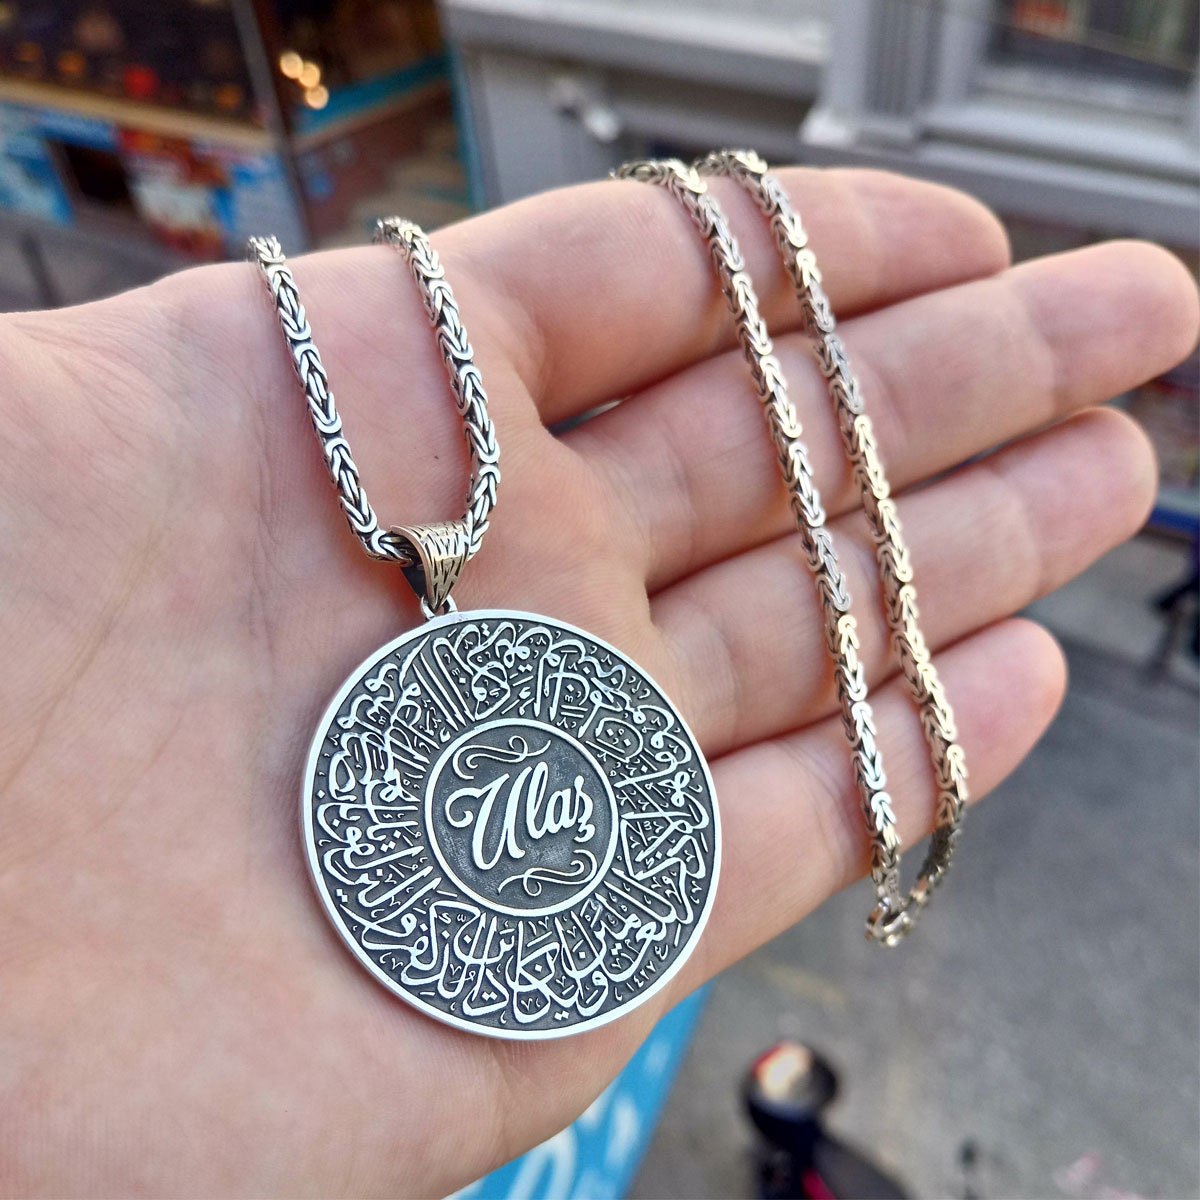 Allah Necklace Pendant With An Adjustable Silver Chain For Men and Women To  Give As Islamic Gifts During Eid | Amazon.com